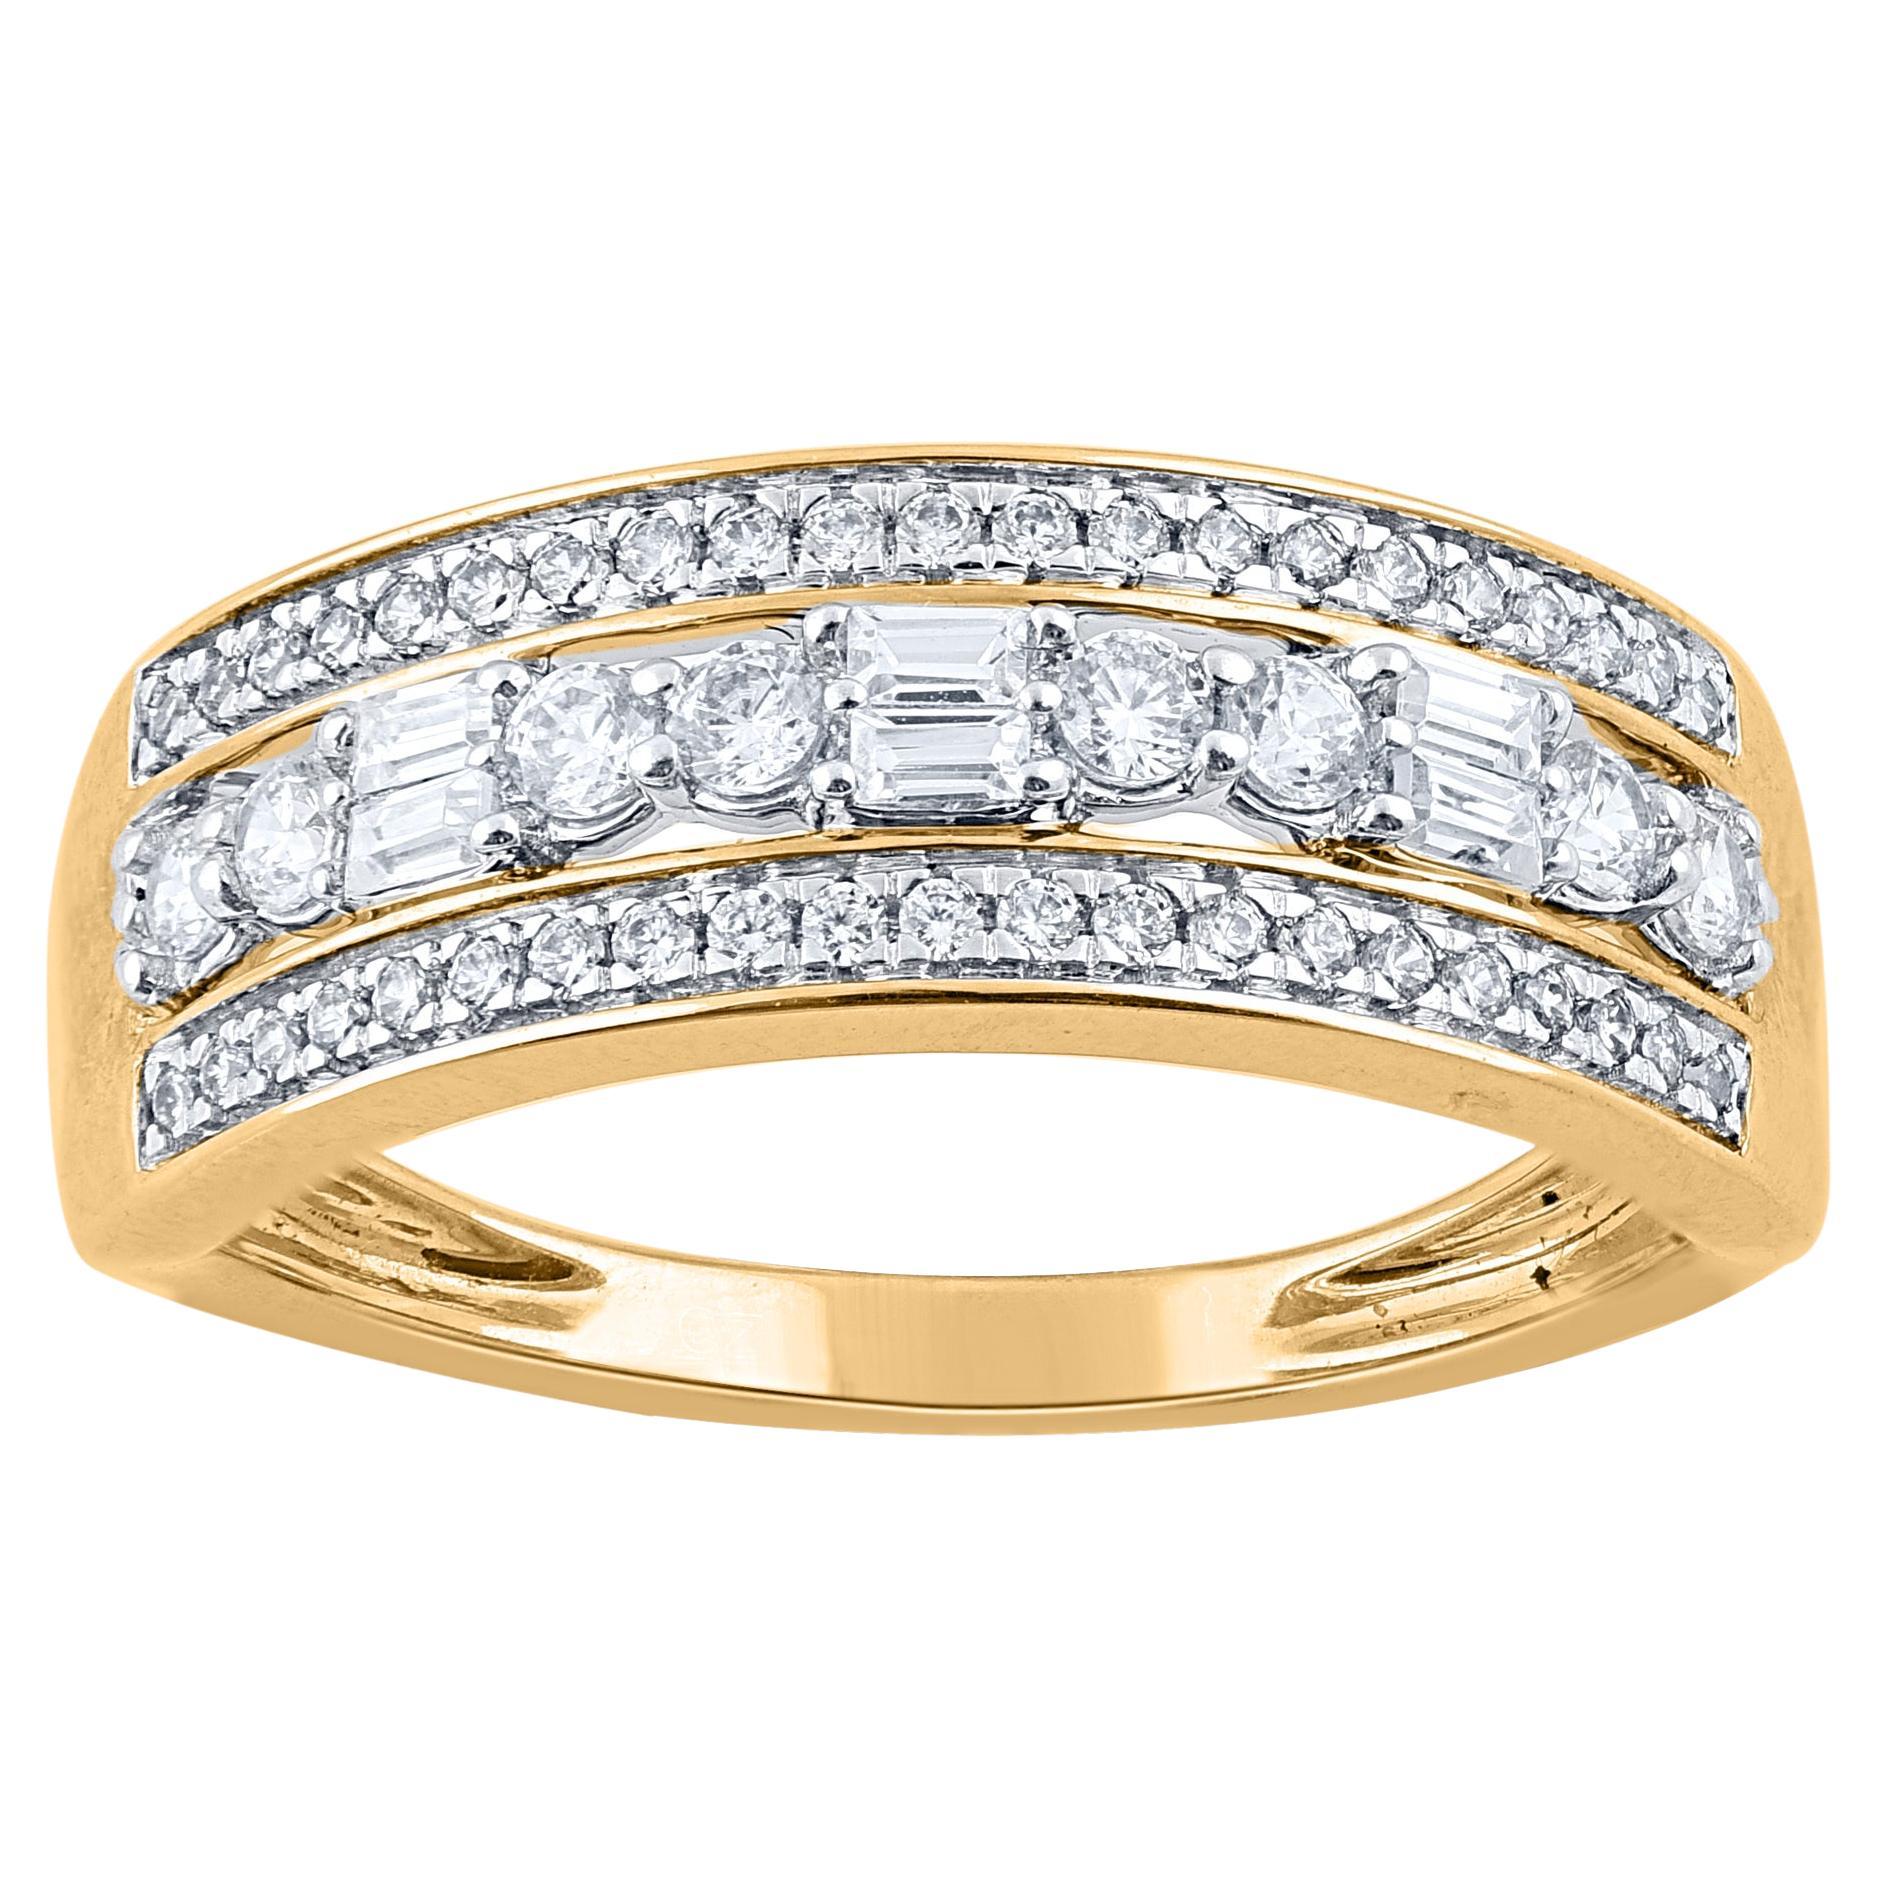 TJD 0.50 Carat Round & Baguette Diamond 18KT Yellow Gold Wedding Band Ring For Sale